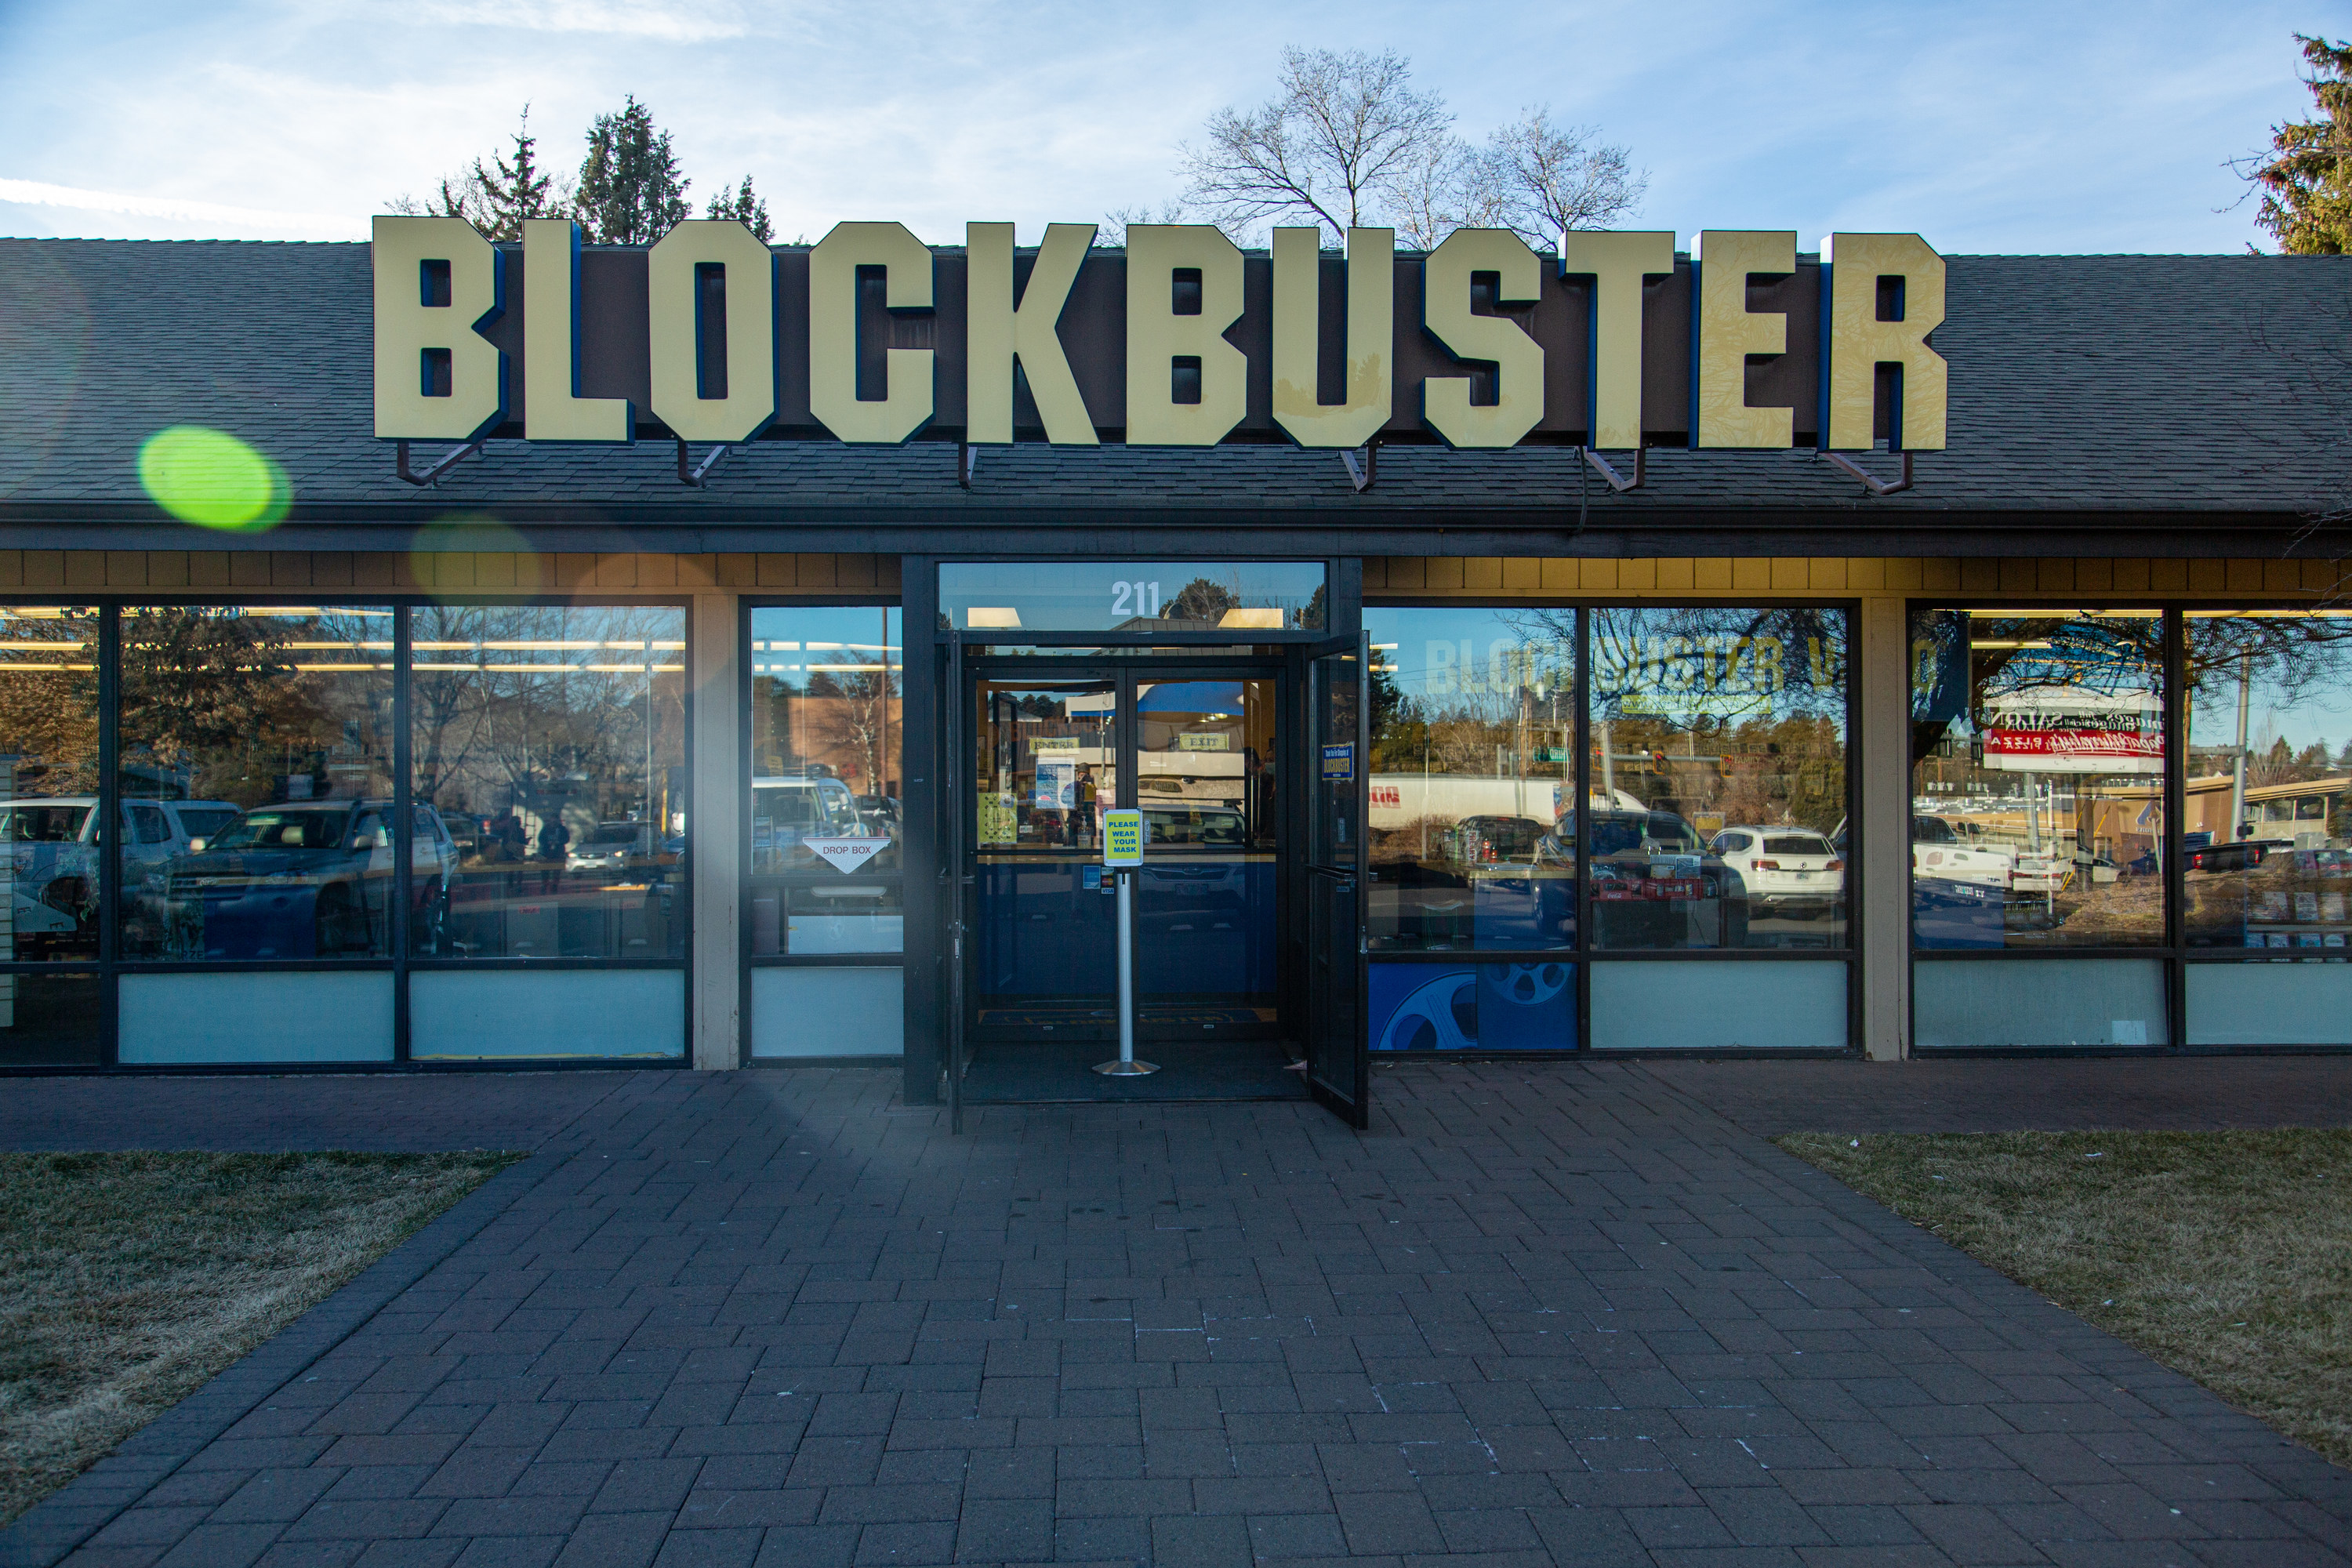 The only remaining Blockbuster video rental store manages to hang on in Bend, Oregon